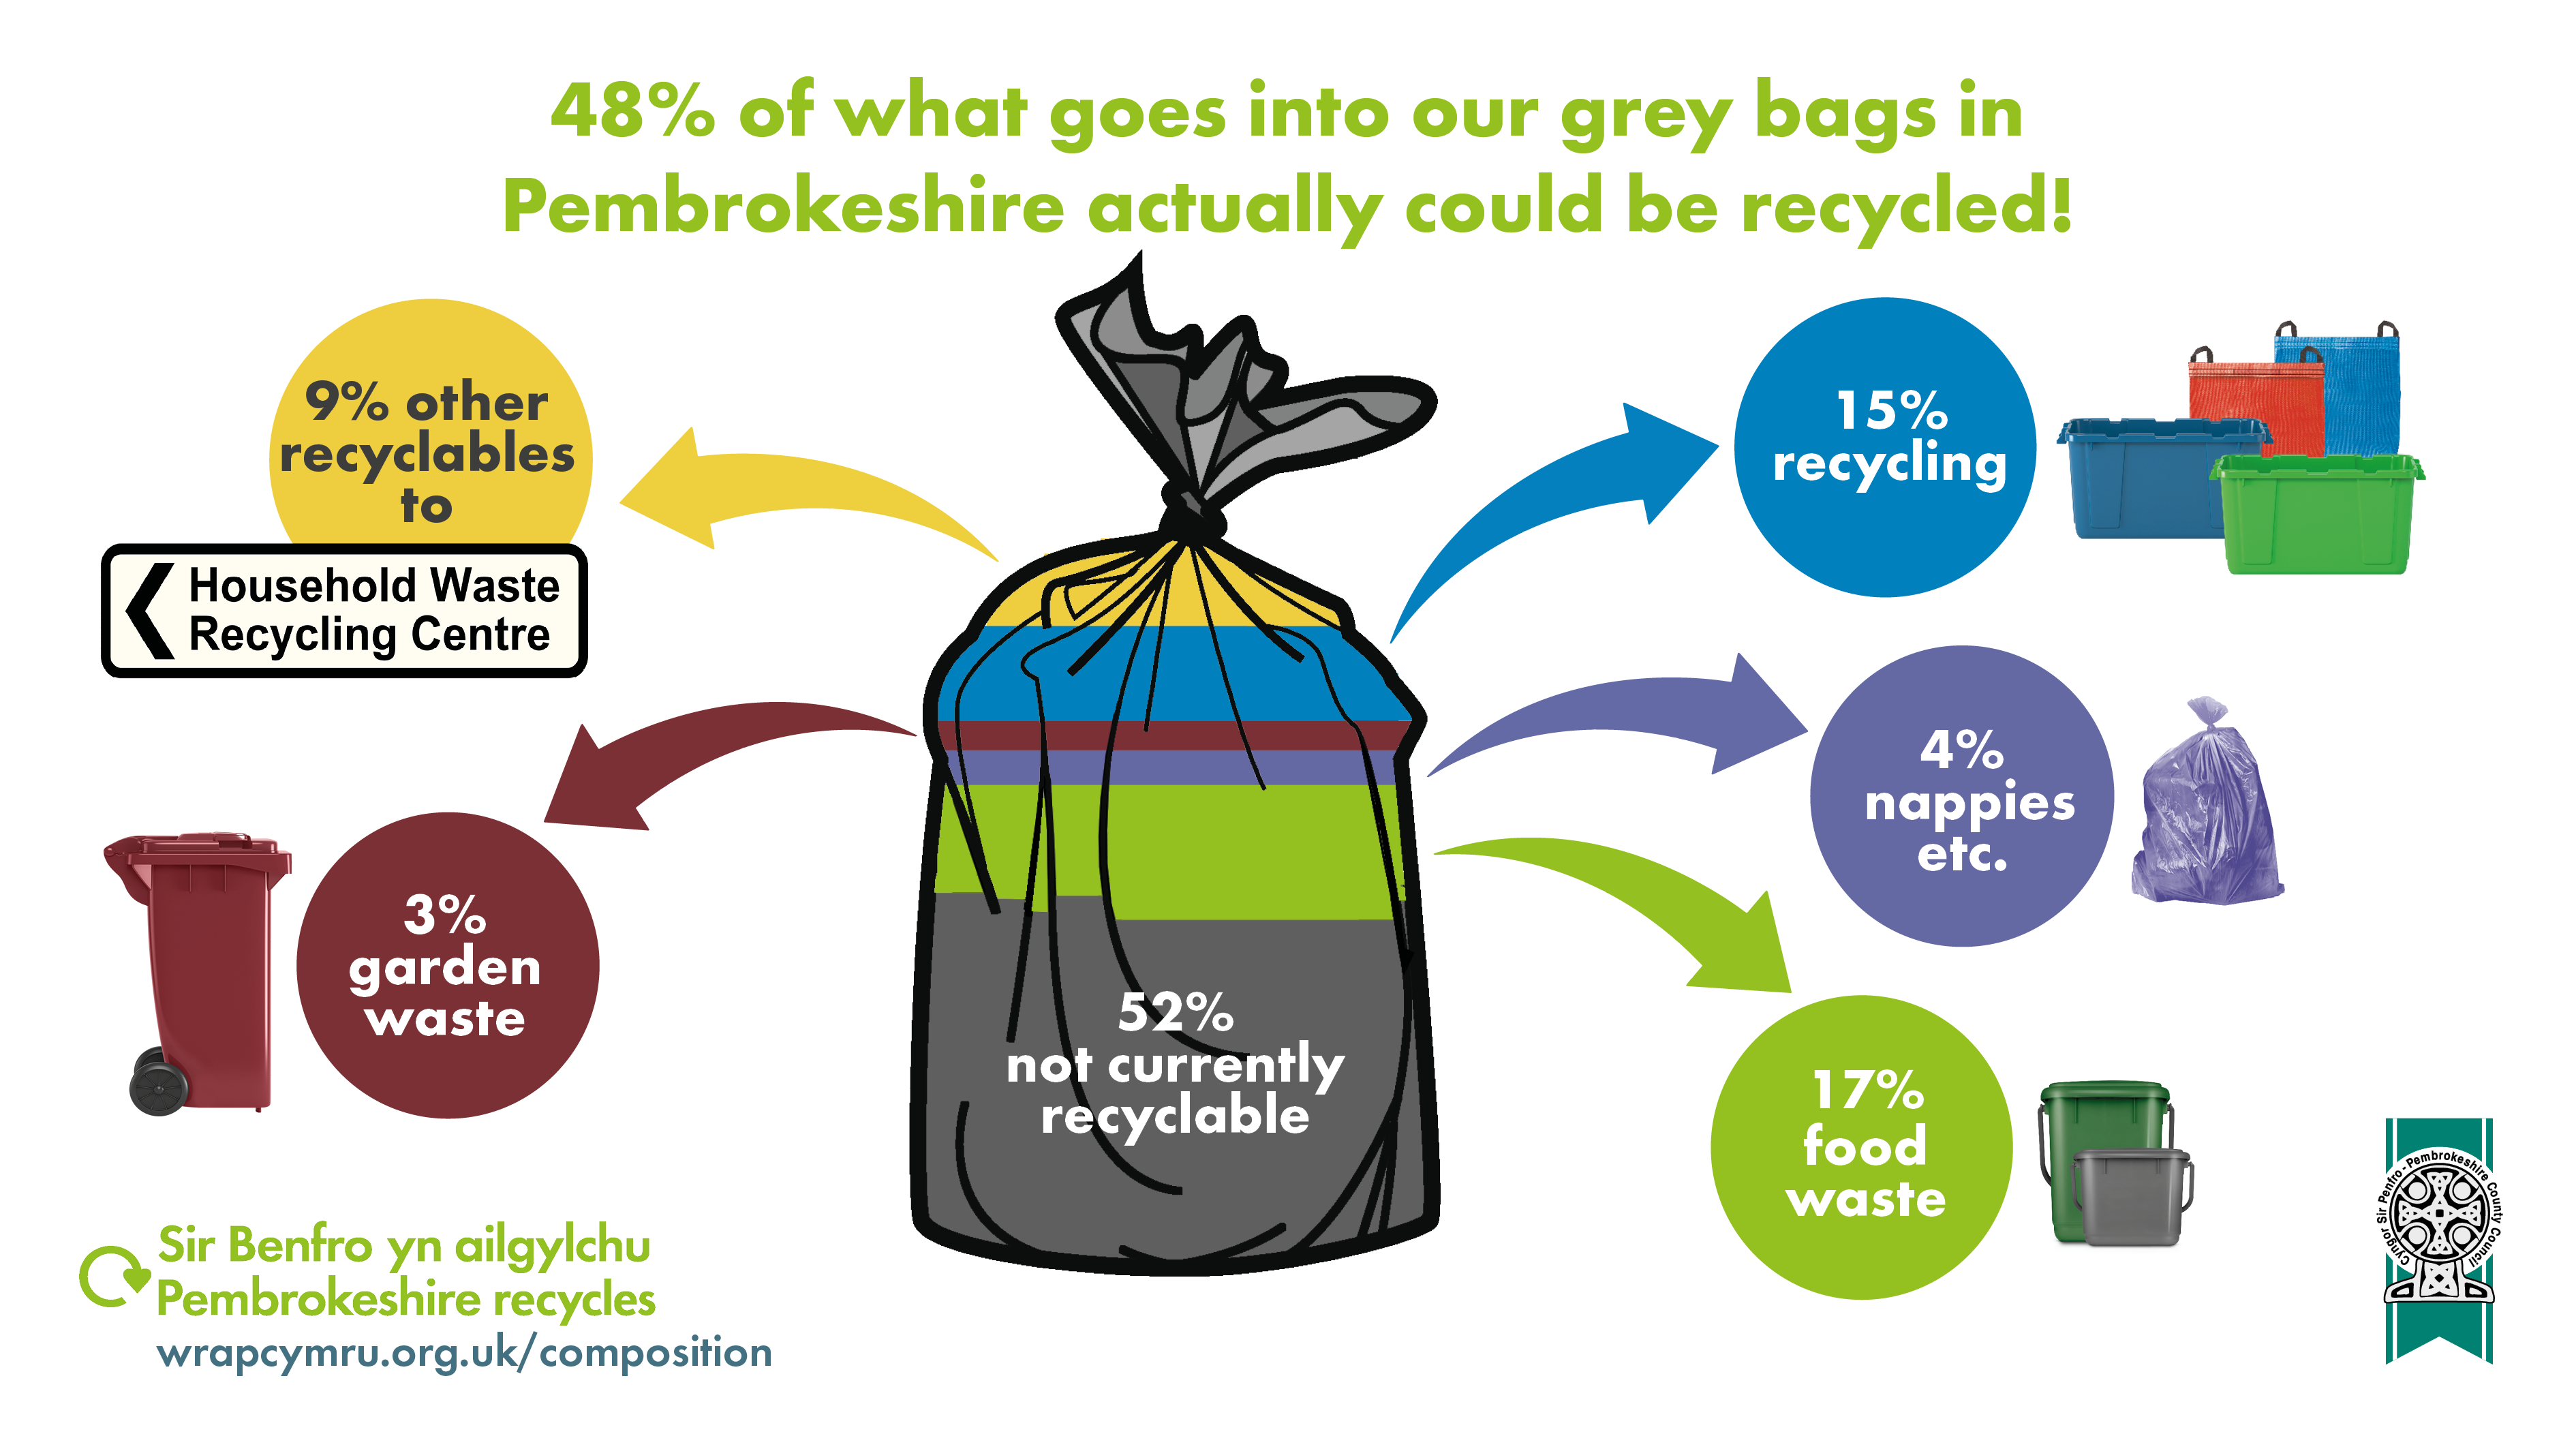 What goes into our grey bags